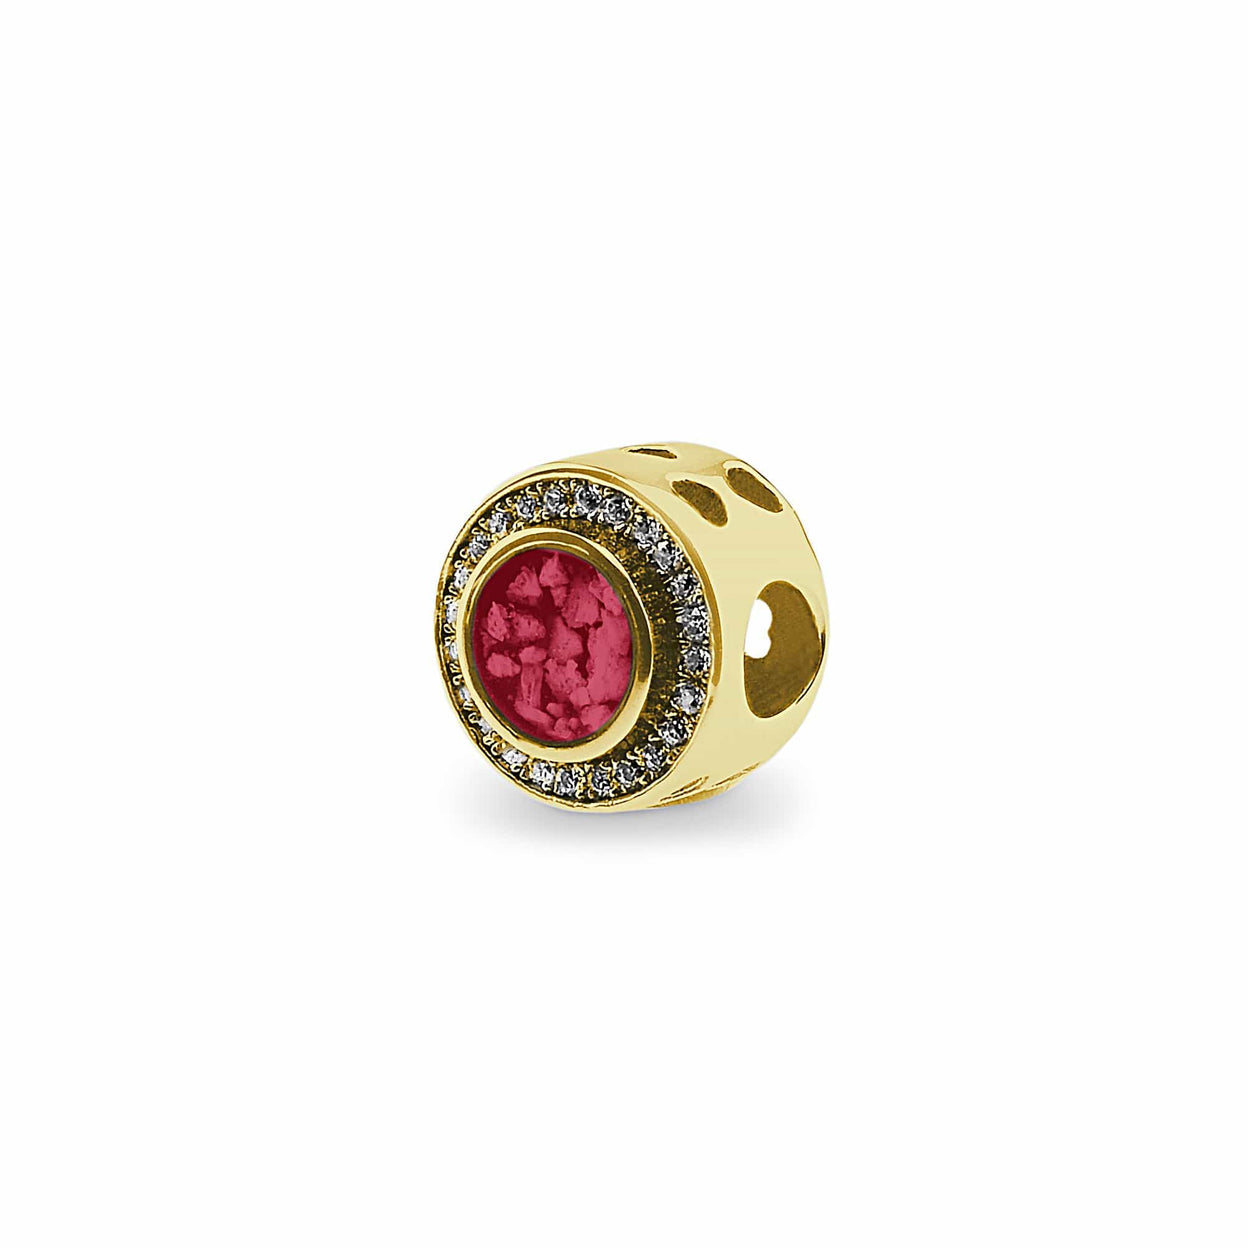 Load image into Gallery viewer, EverWith™ Admire Memorial Ashes Charm Bead with Swarovski Crystals - EverWith Memorial Jewellery - Trade